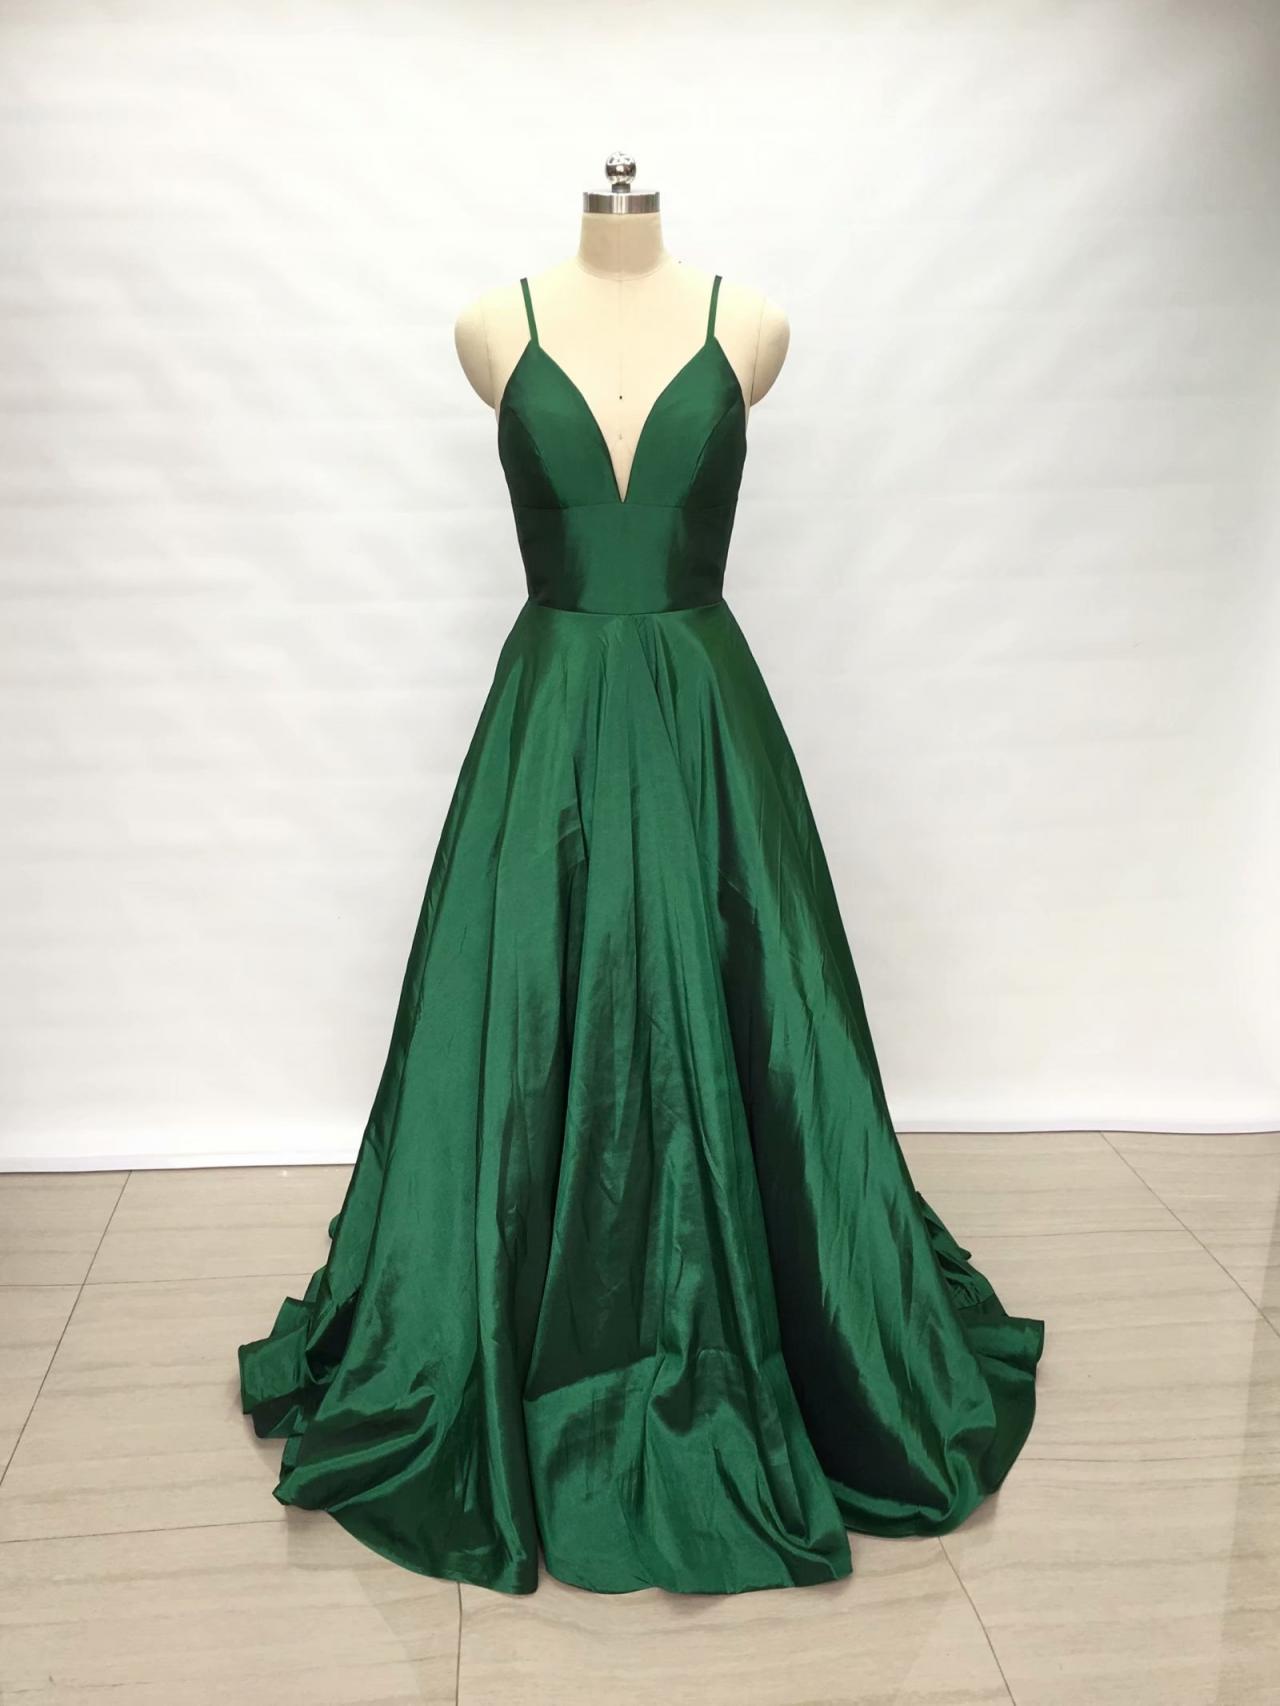 2019 Spaghetti Straps Dark Green Evening Dresses A Line Prom Gowns